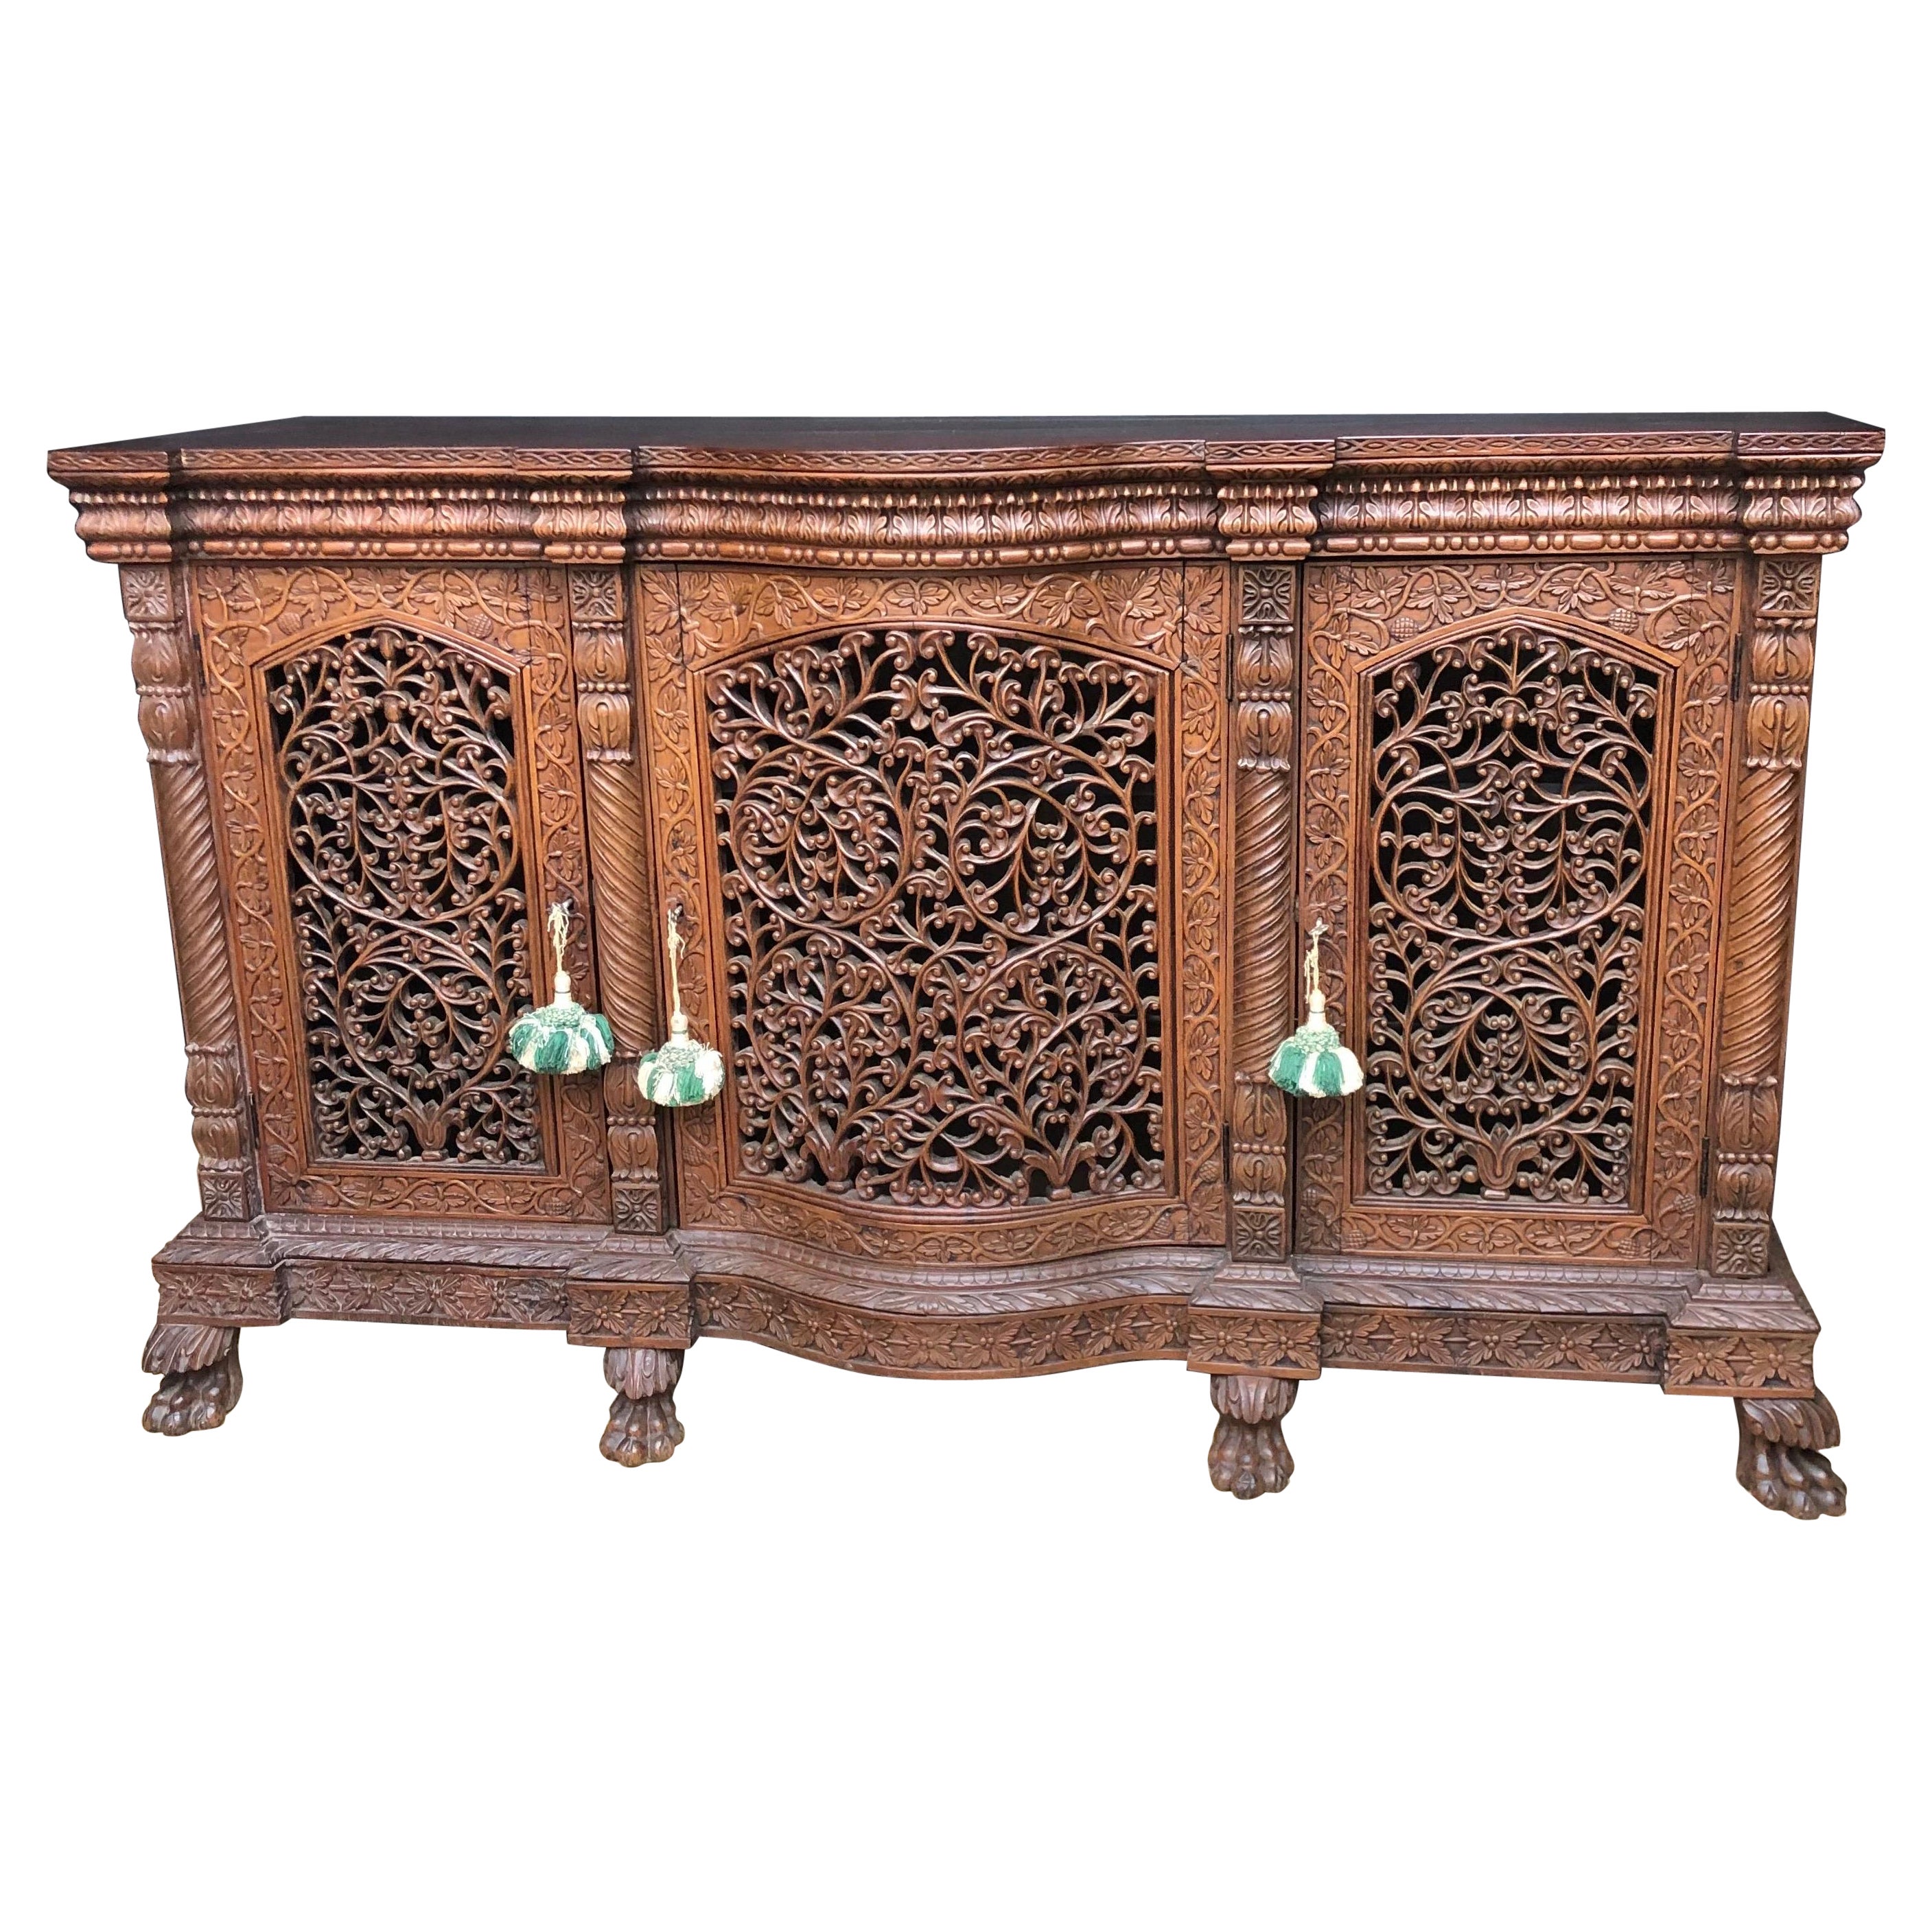 19th C. Anglo Indian Regency Carved Mahogany & Padouk Sideboard / Credenza For Sale